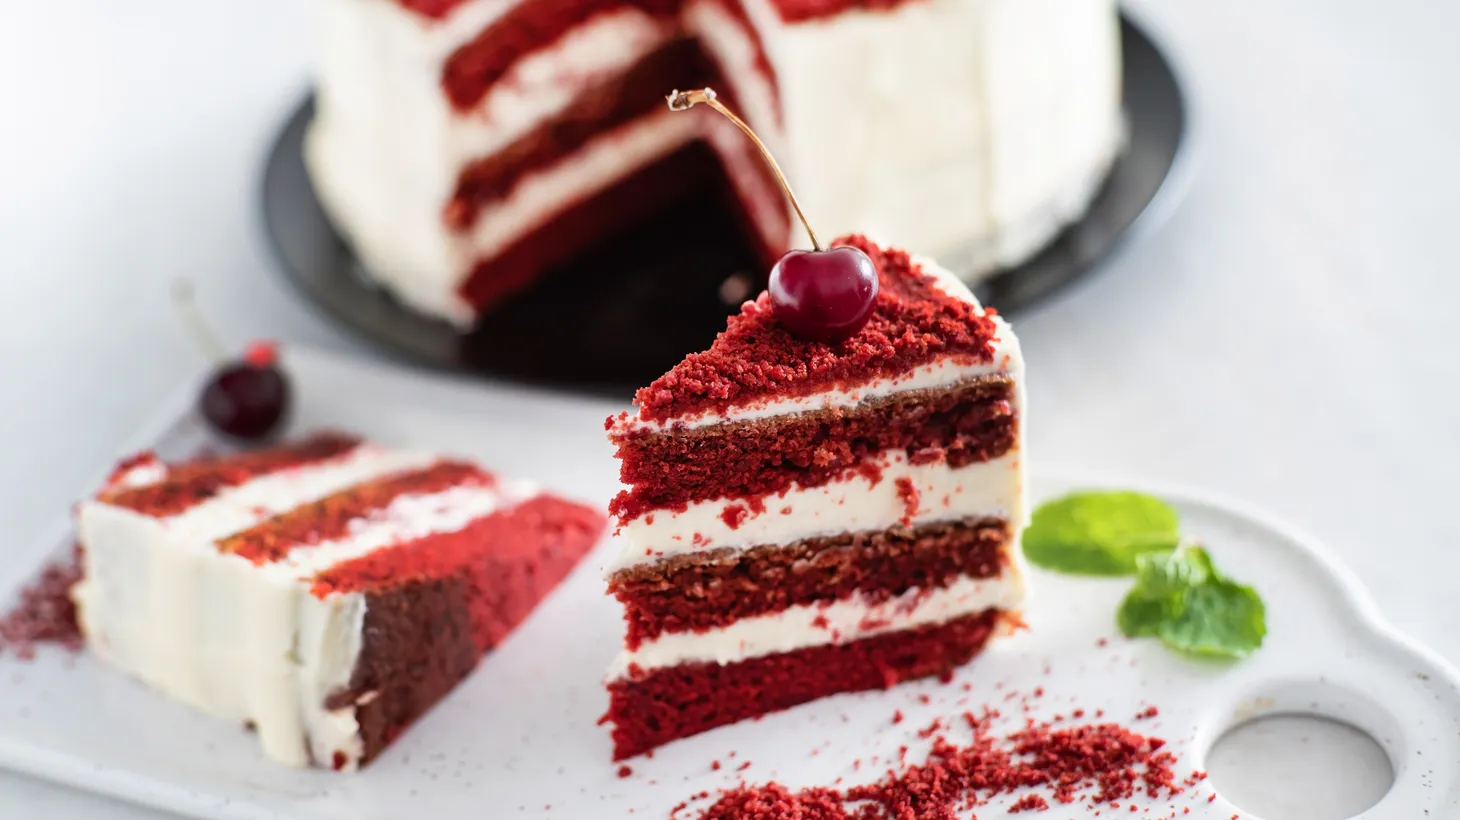 The best red velvet cakes have a characteristic tender moist crumb.